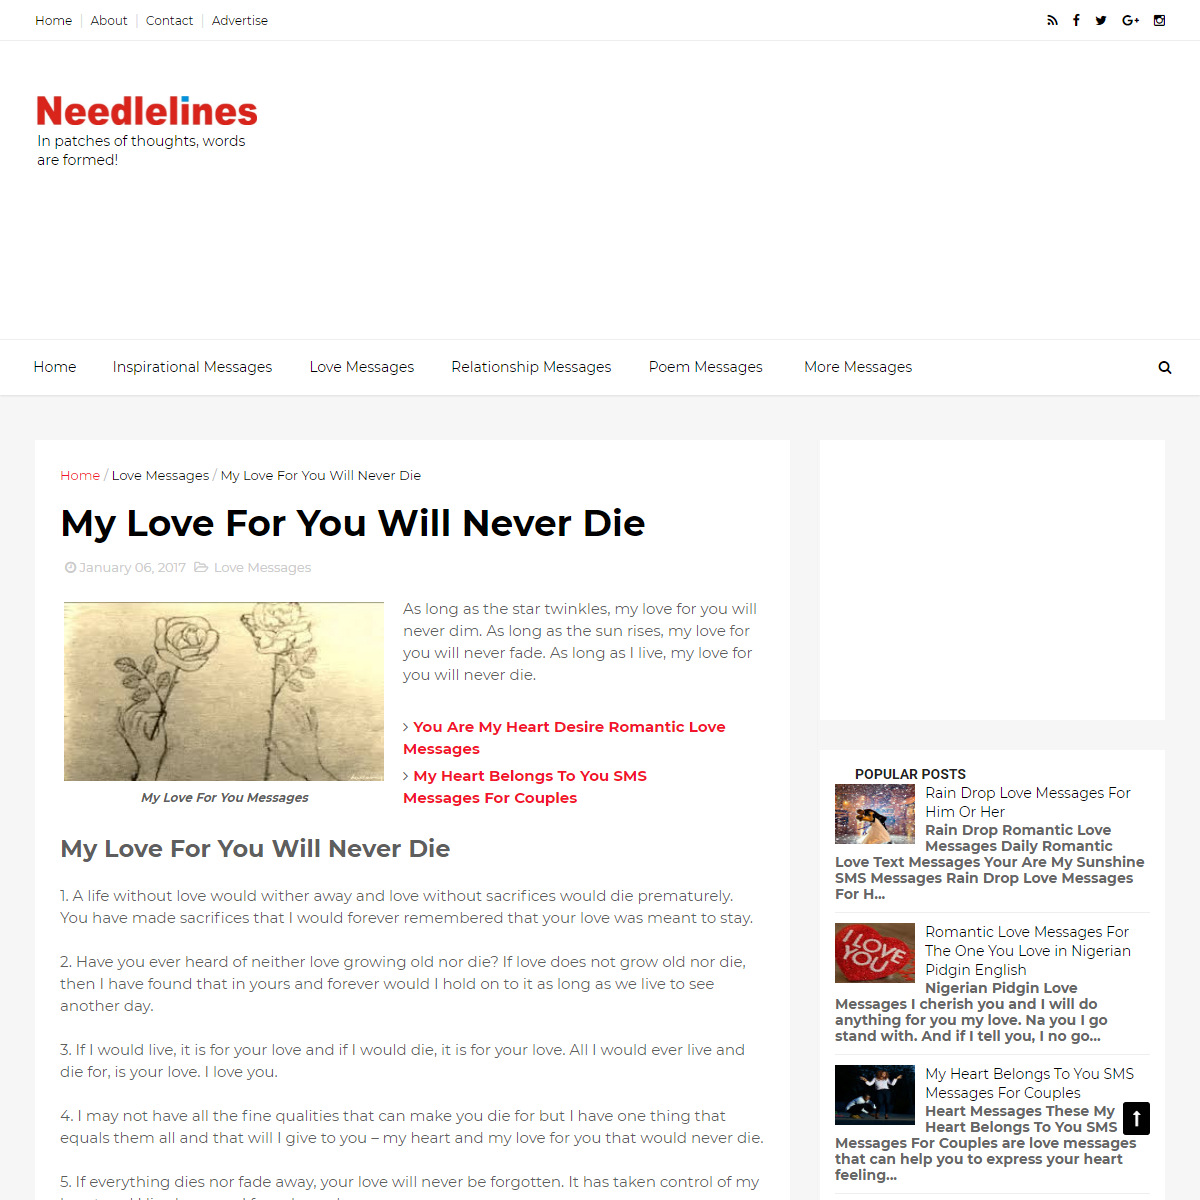 A complete backup of https://needlelines.blogspot.com/2017/01/my-love-for-you-will-never-die.html